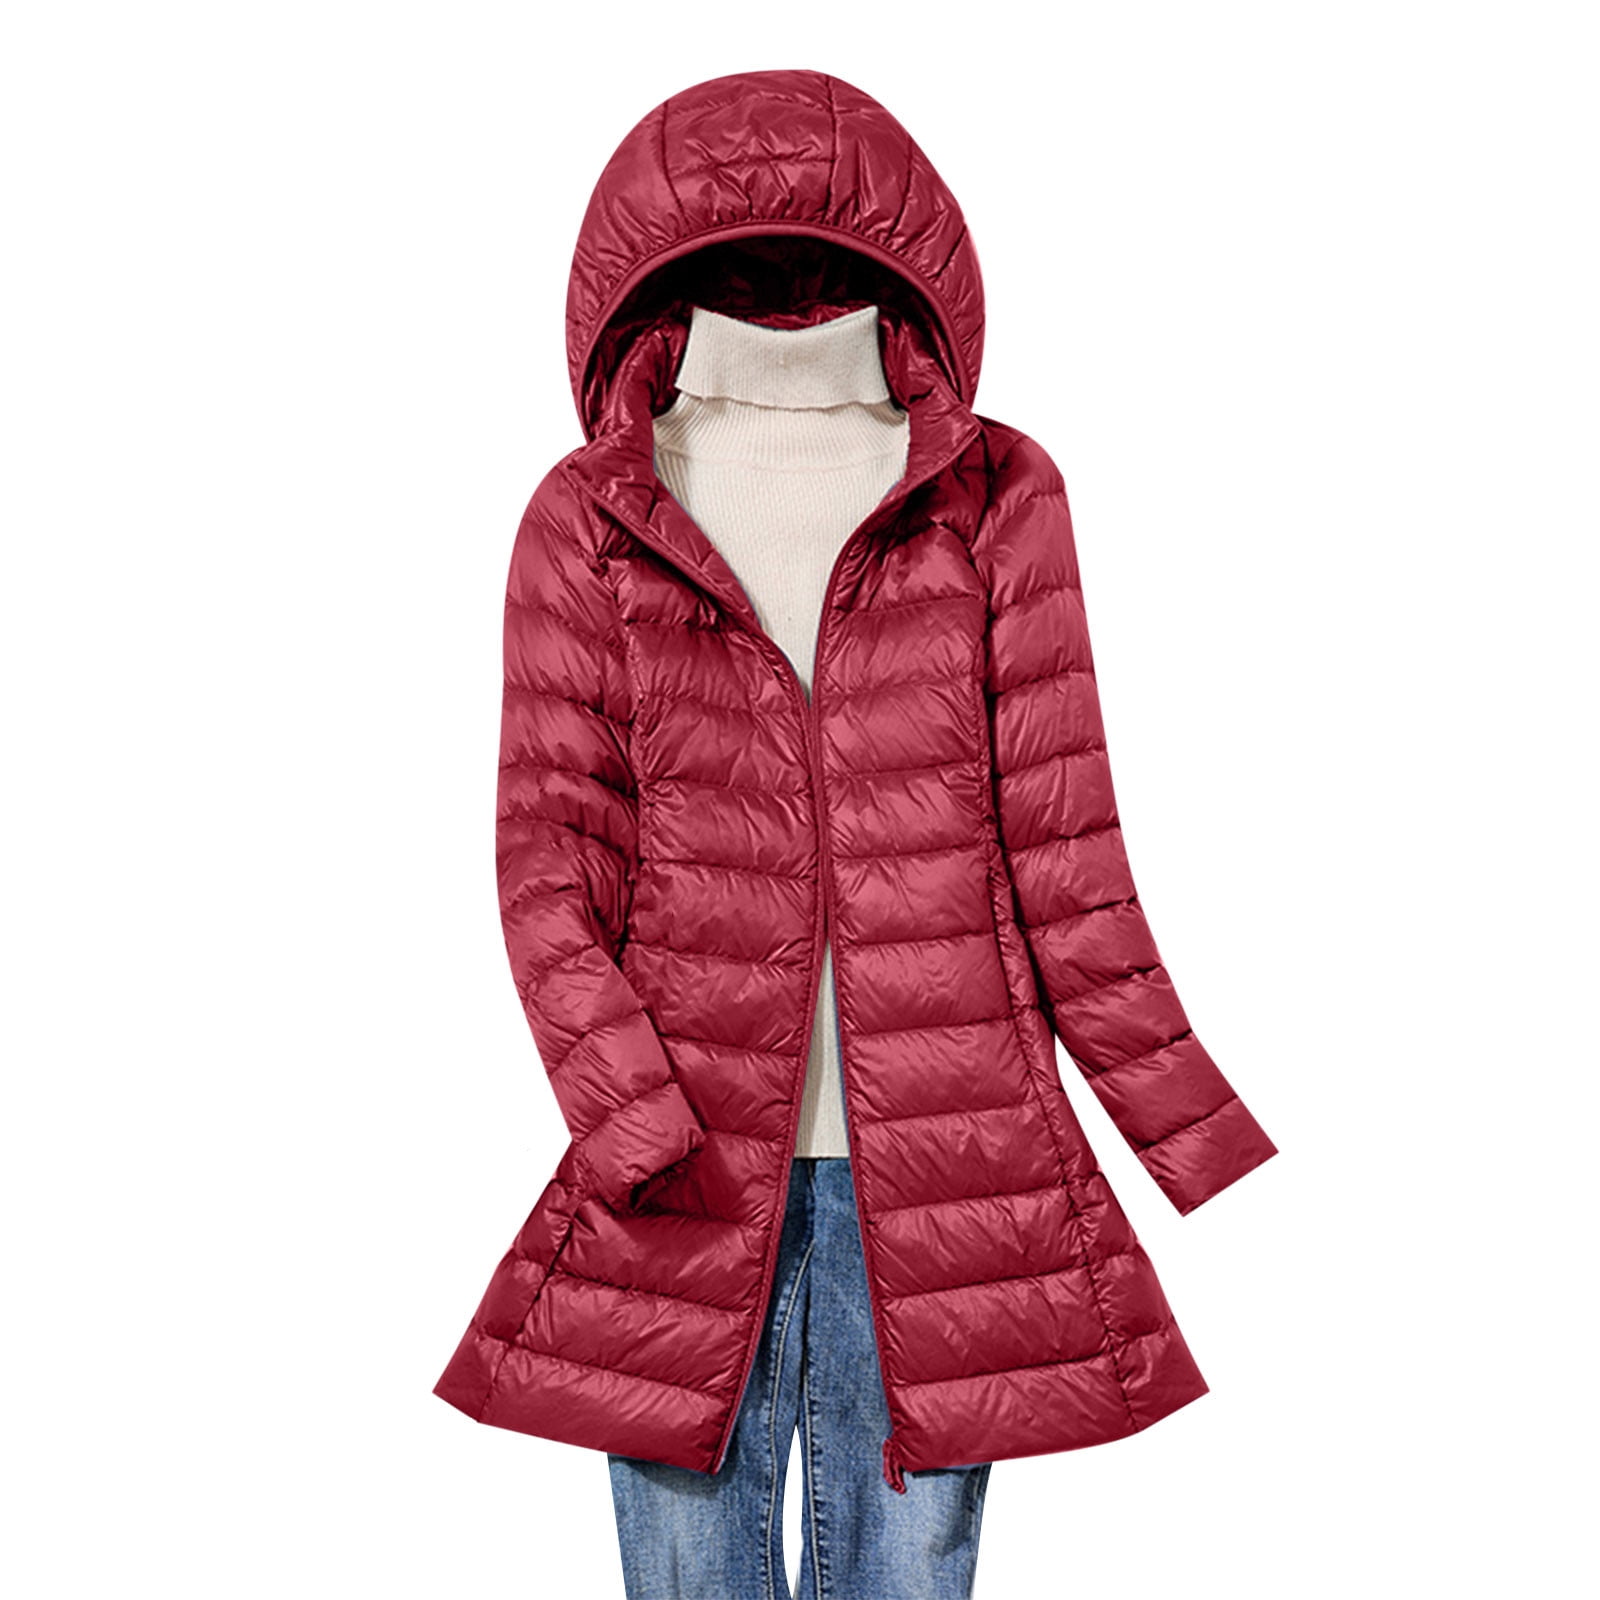 pbnbp Women's Packable Puffer Jacket Plus Size Winter Warm Long Quilted ...